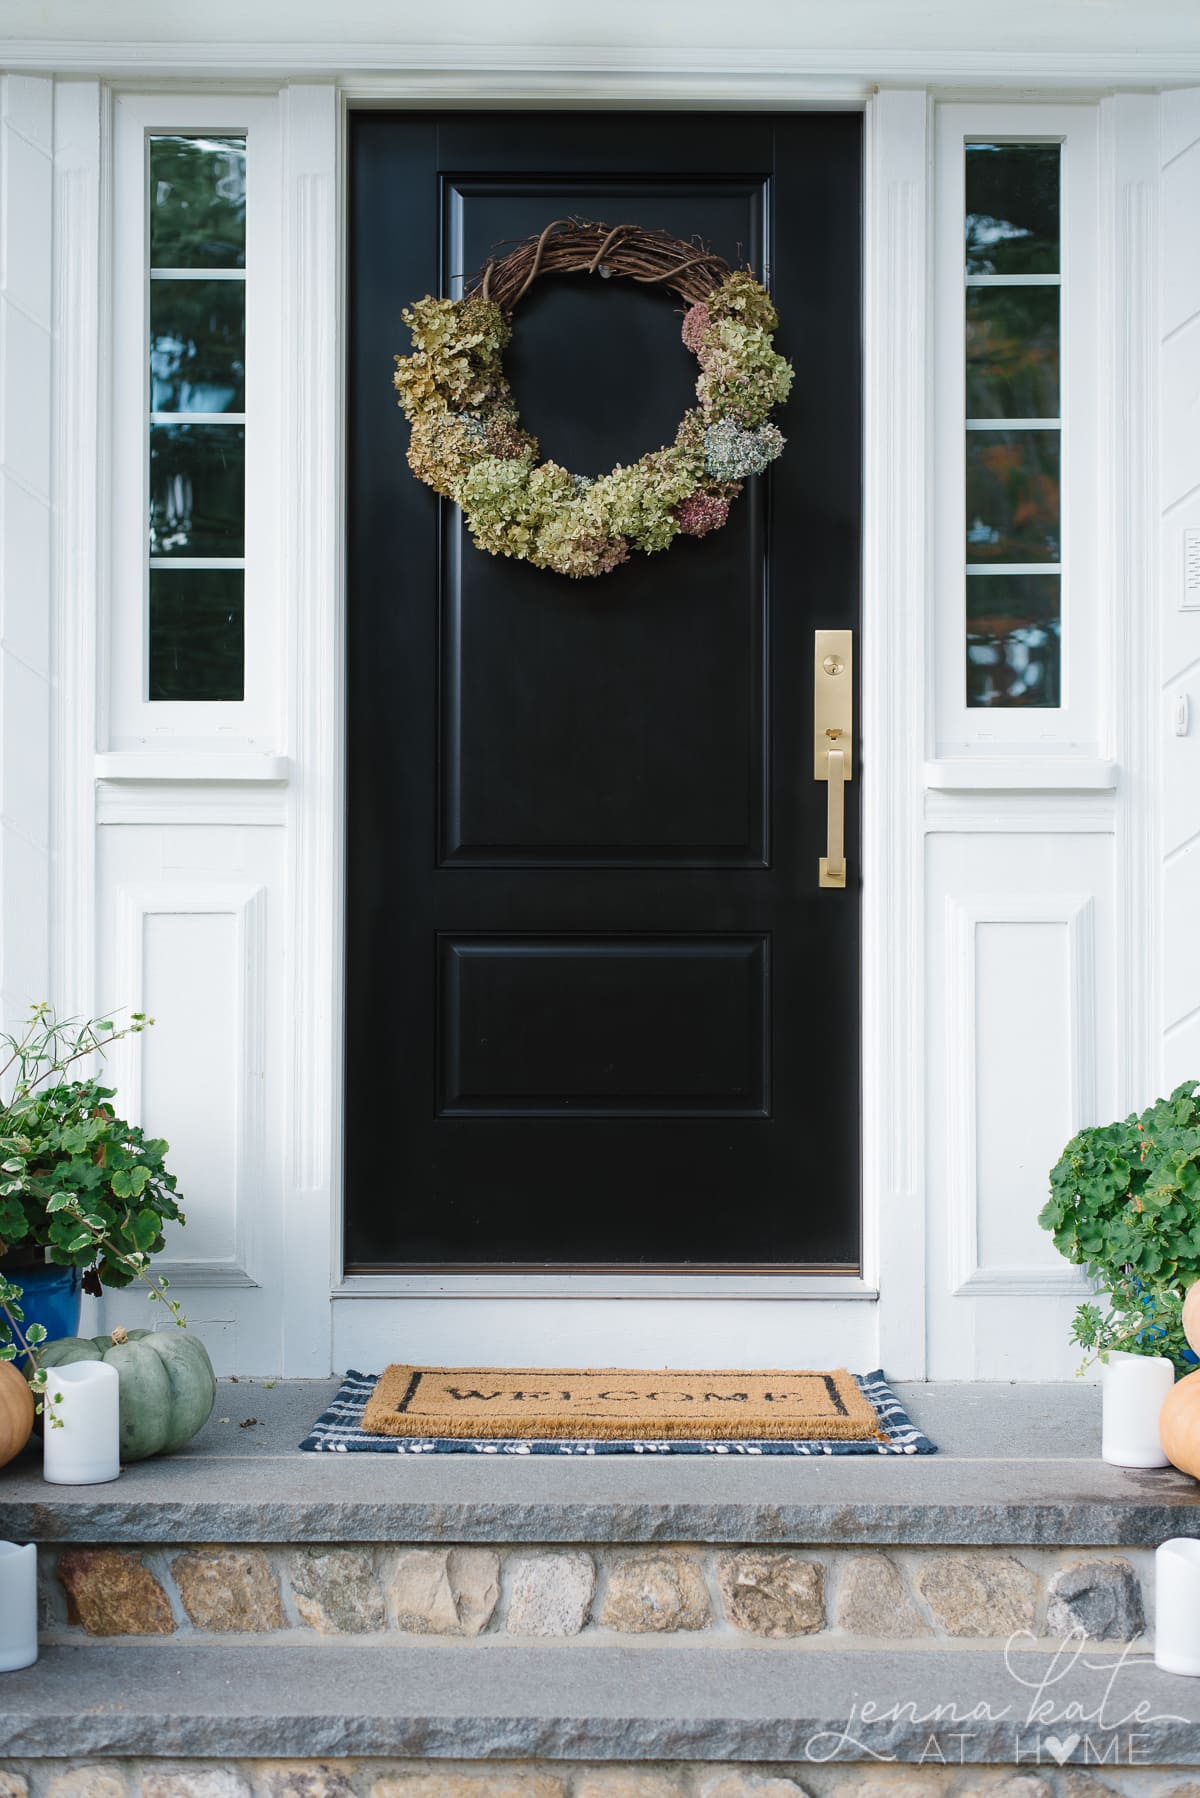 Hydrangea wreath hanging on the front door for fall decor